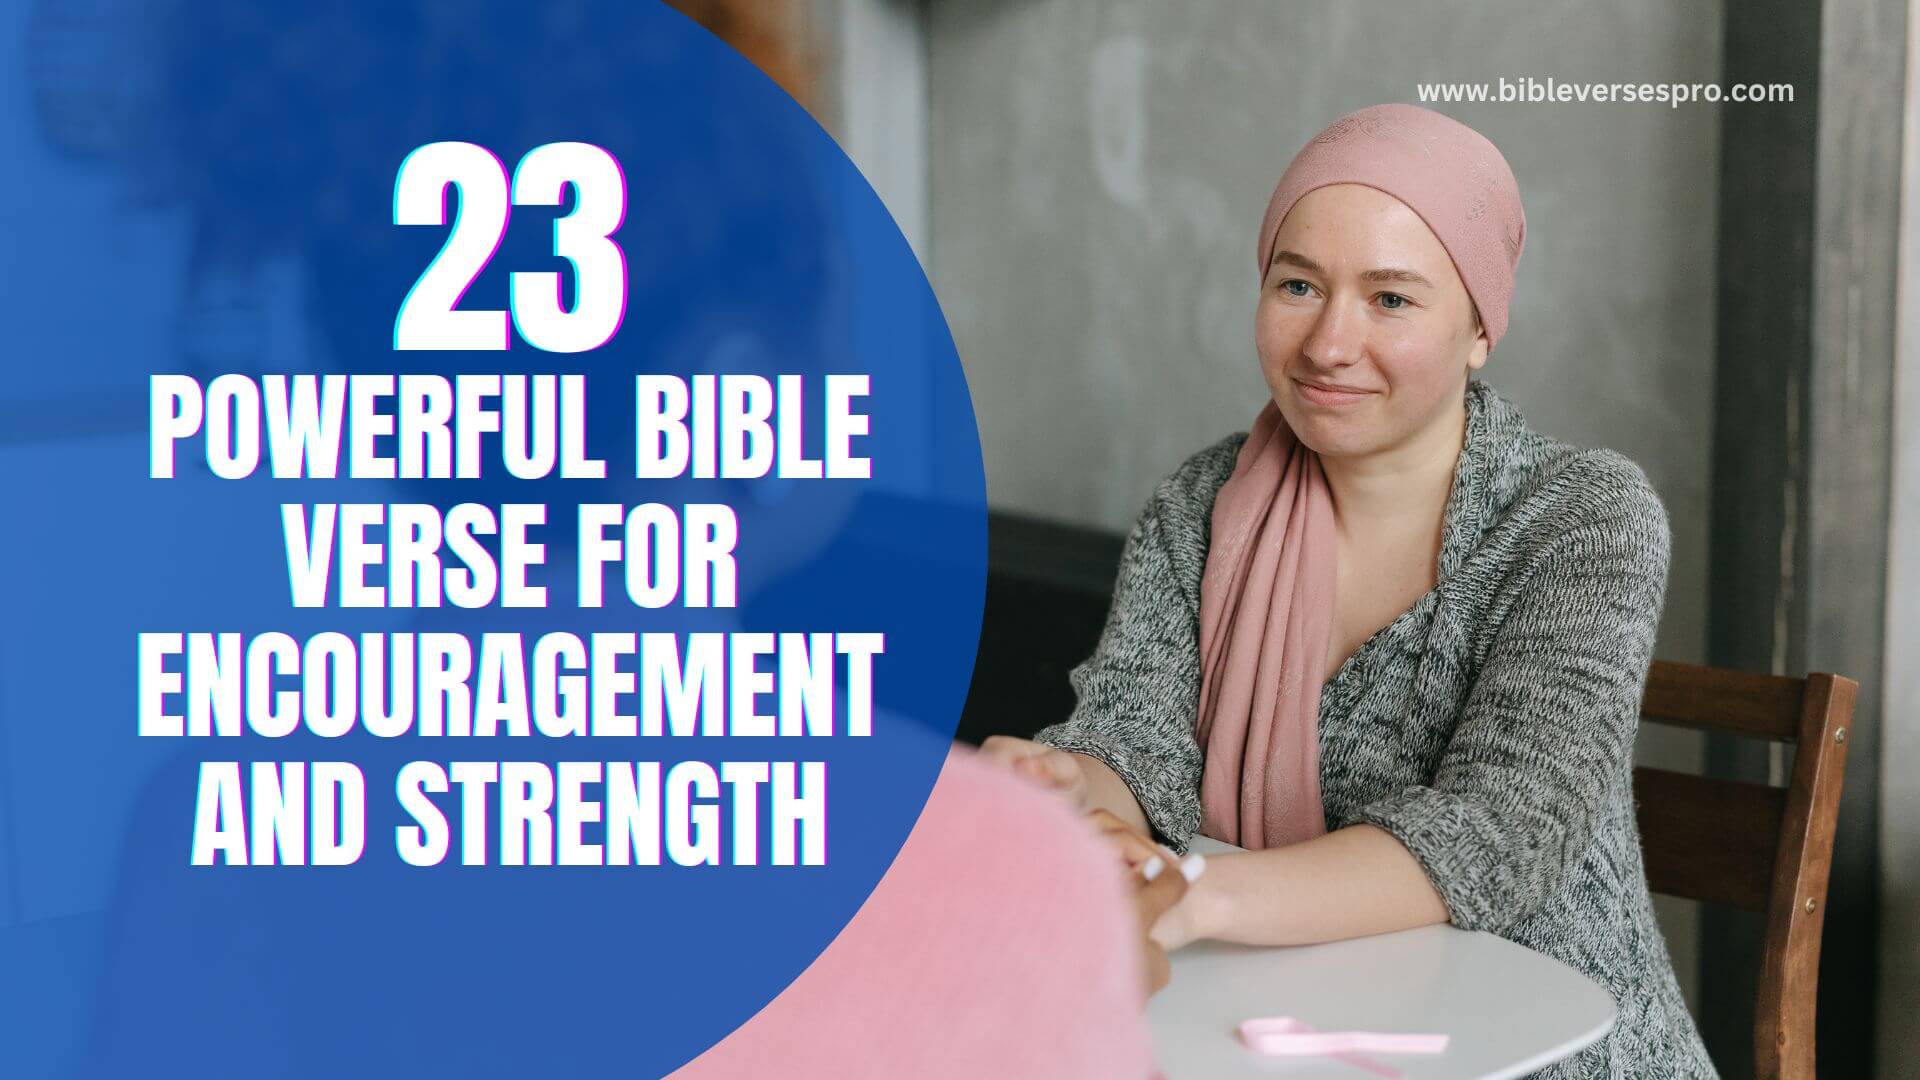 POWERFUL BIBLE VERSE FOR ENCOURAGEMENT AND STRENGTH 1 